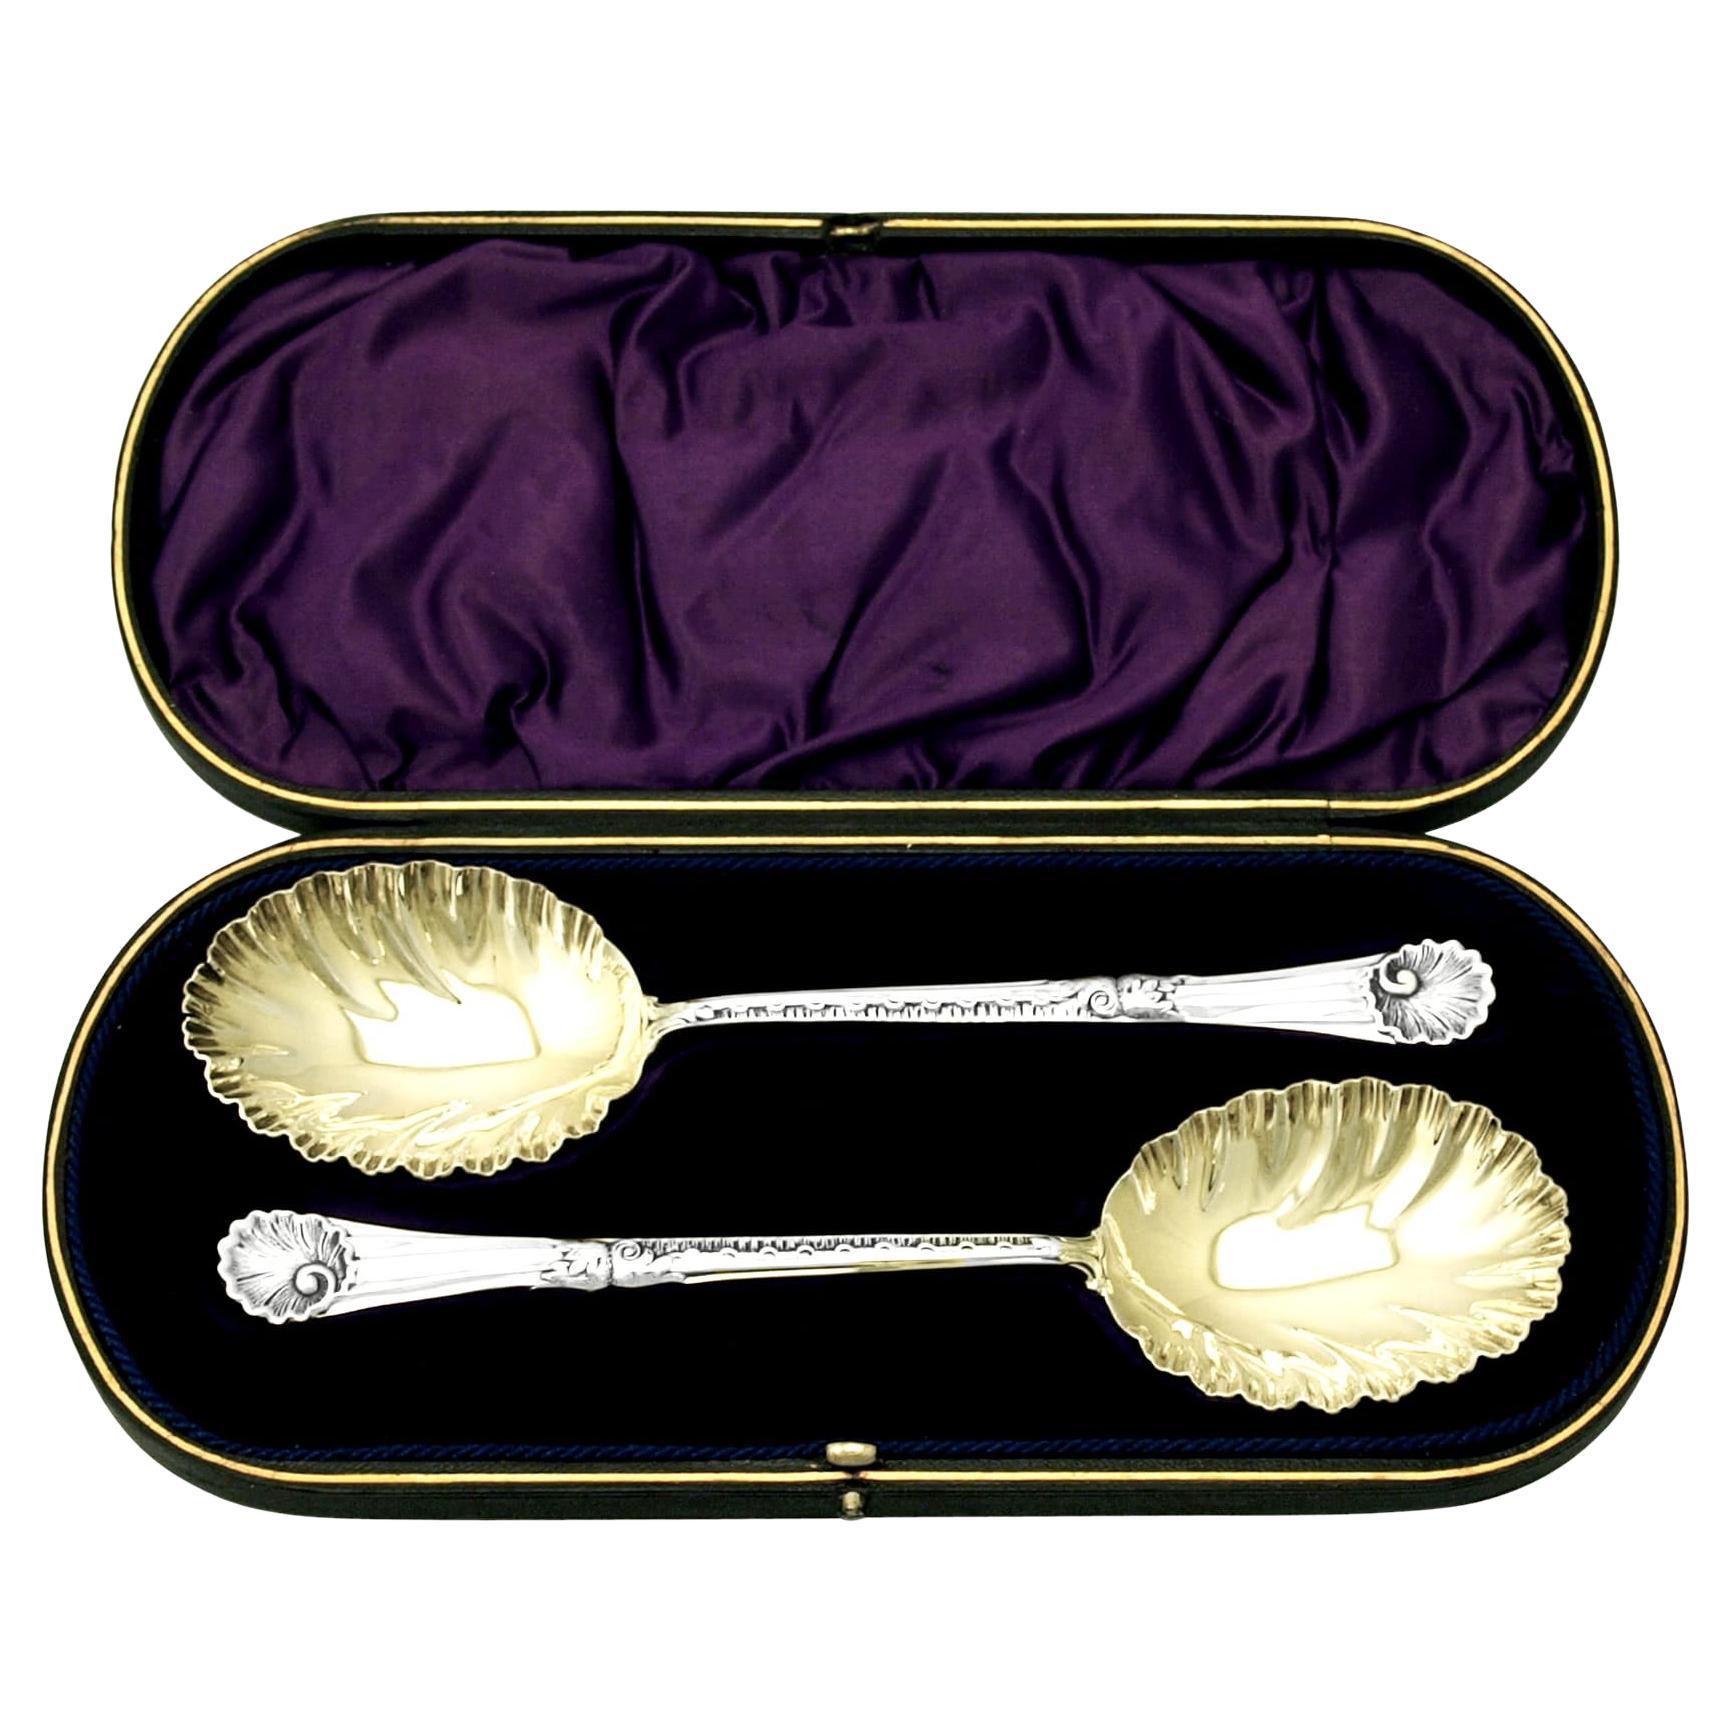 1898 Victorian English Sterling Silver Fruit Spoons 